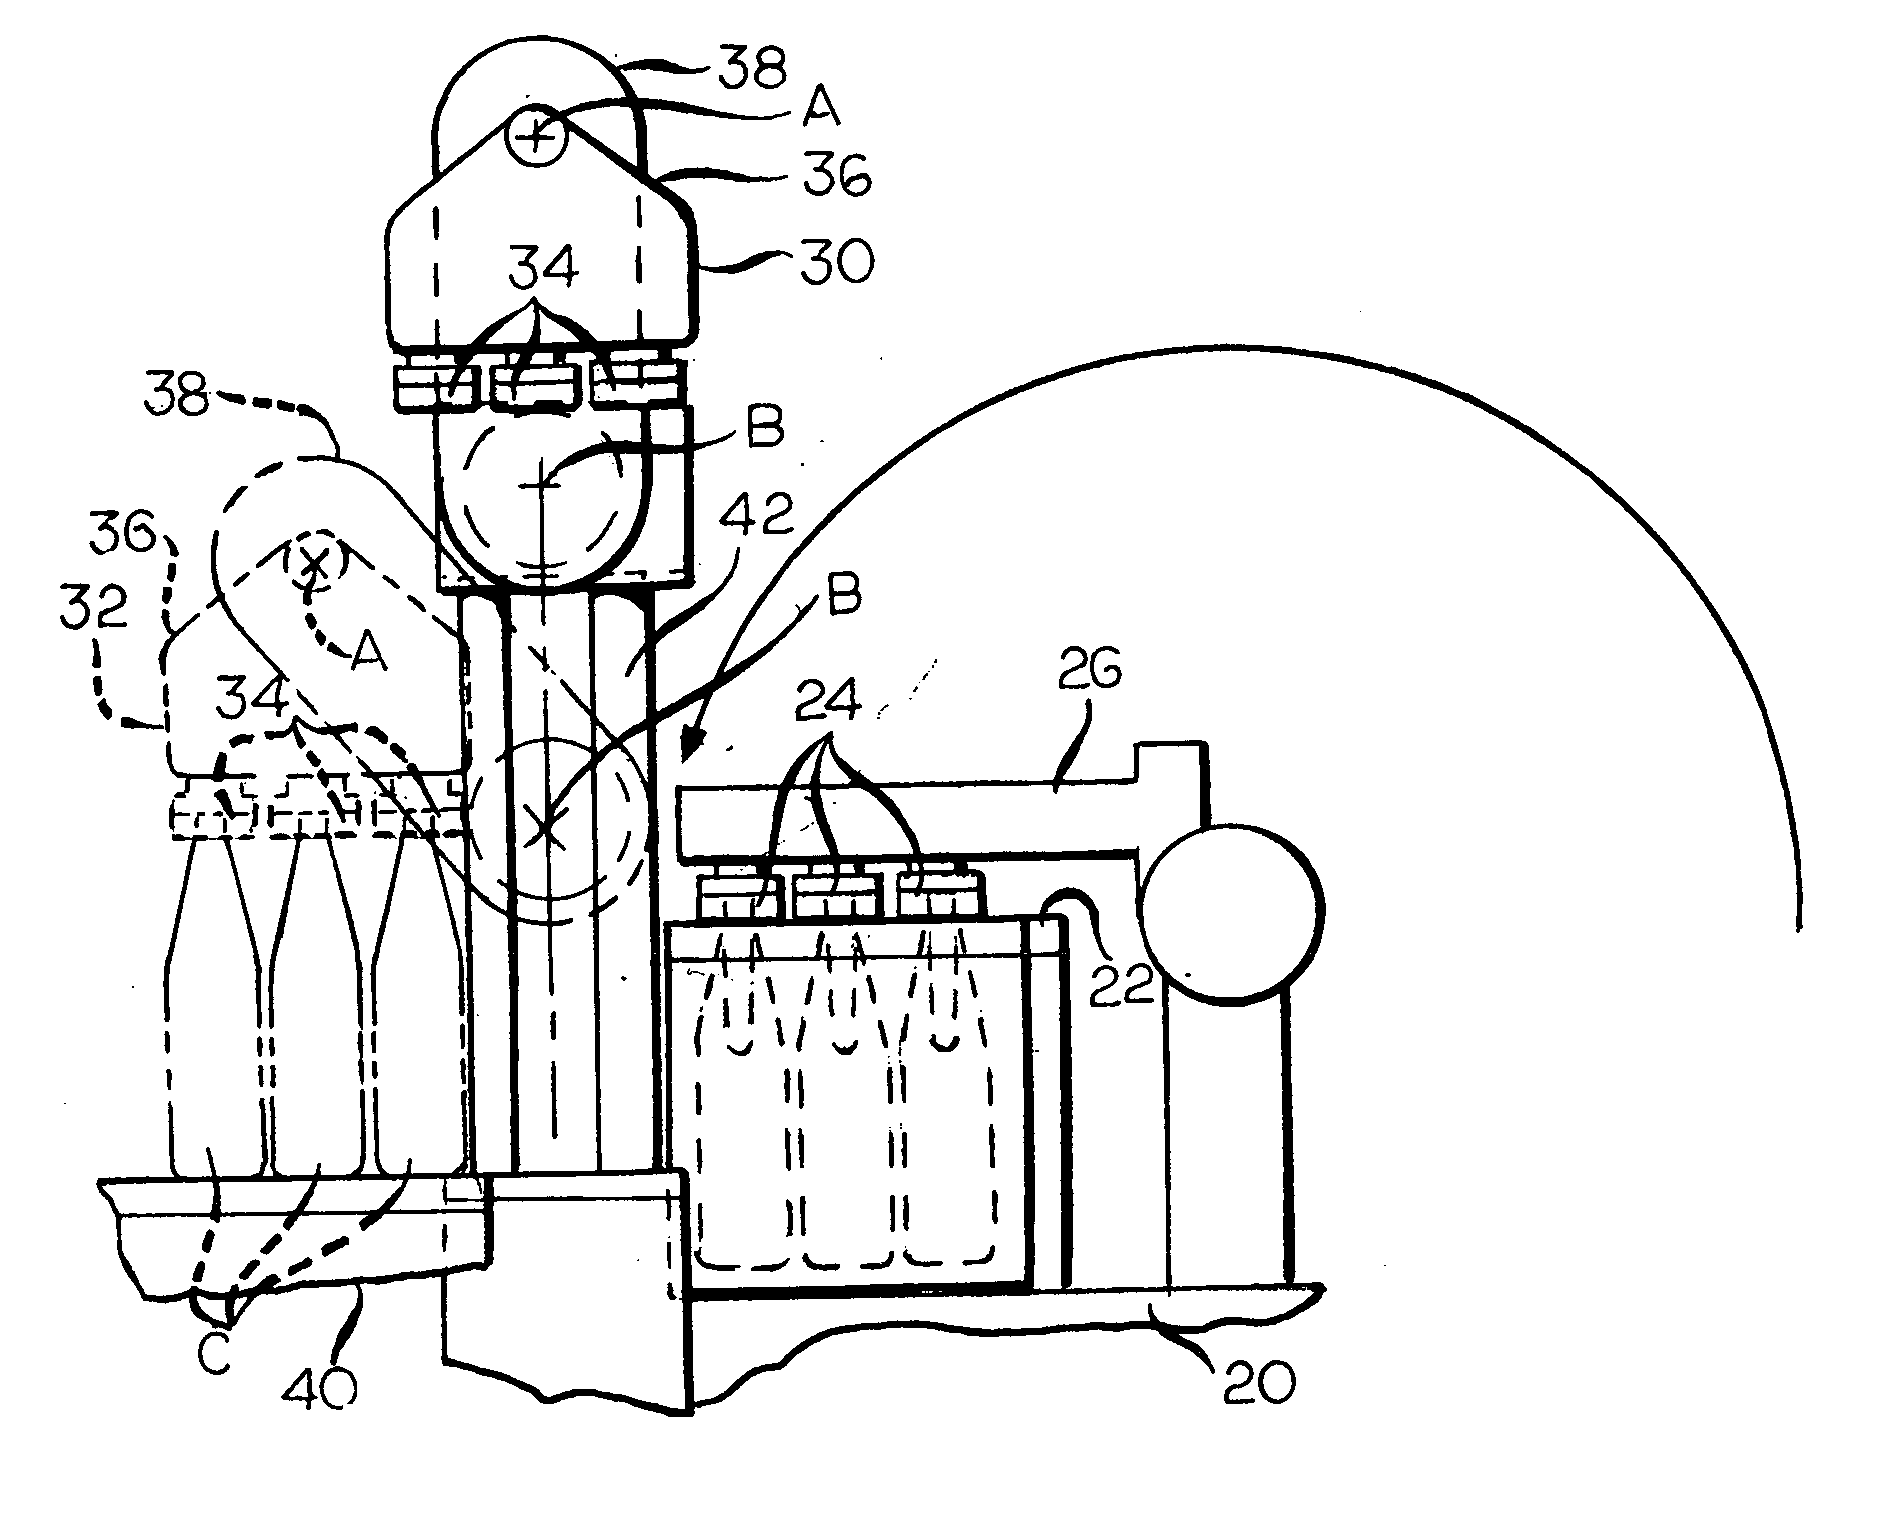 Method and apparatus for blowing and removing glass containers